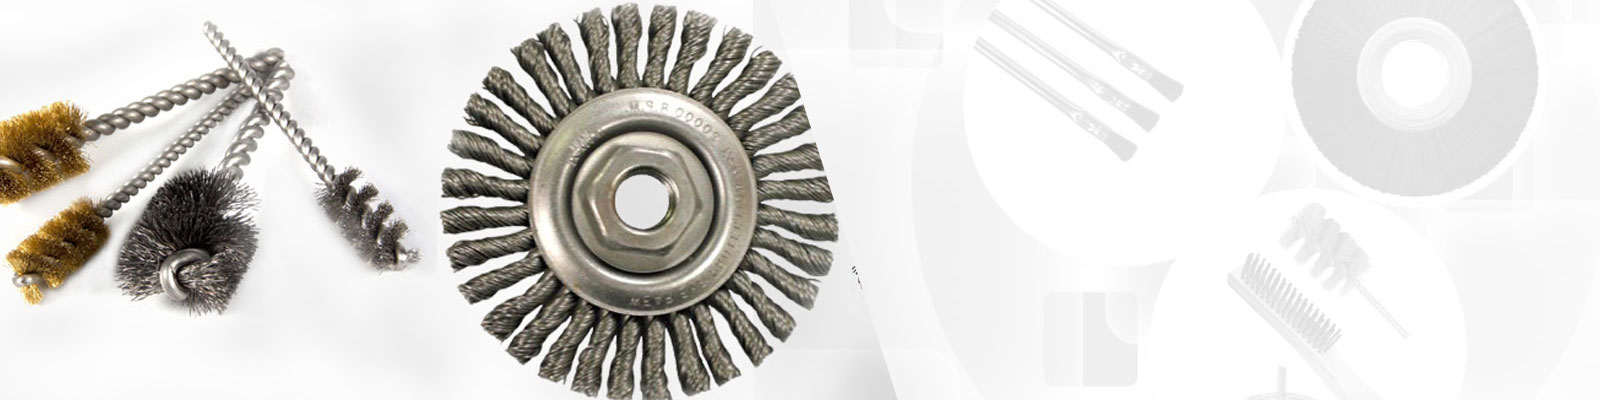 RADIAL END BRUSHES STAINLESS STEEL